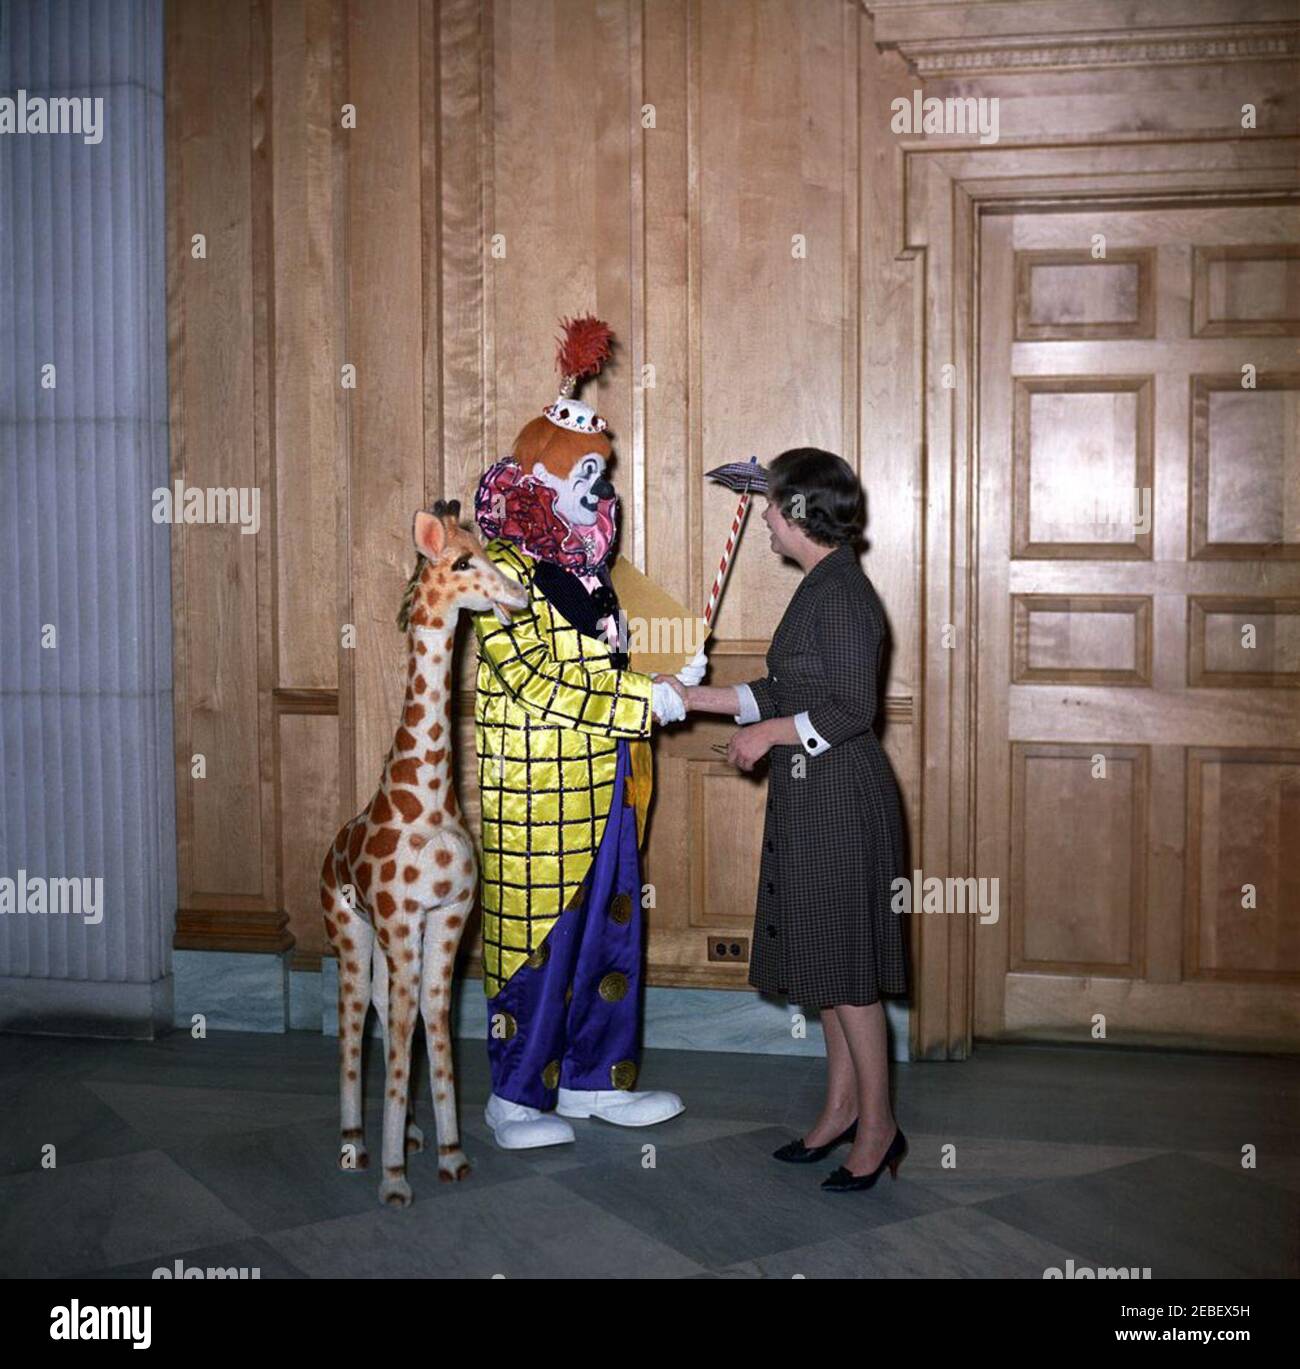 Ringling Bros. and Barnum u0026 Bailey Circus clown Jackie Le Claire presents a gift for Caroline Kennedy (CBK), with David Polland and Hortense Burton (John J. McNally). Hortense Burton, Chief of the Correspondence Pool in the Social Entertainments Office, greets Ringling Bros. and Barnum u0026 Bailey Circus clown, Jackie LeClaire, who is presenting a toy stuffed giraffe as a gift for Caroline Kennedy. East Wing Lobby, White House, Washington, D.C. Stock Photo